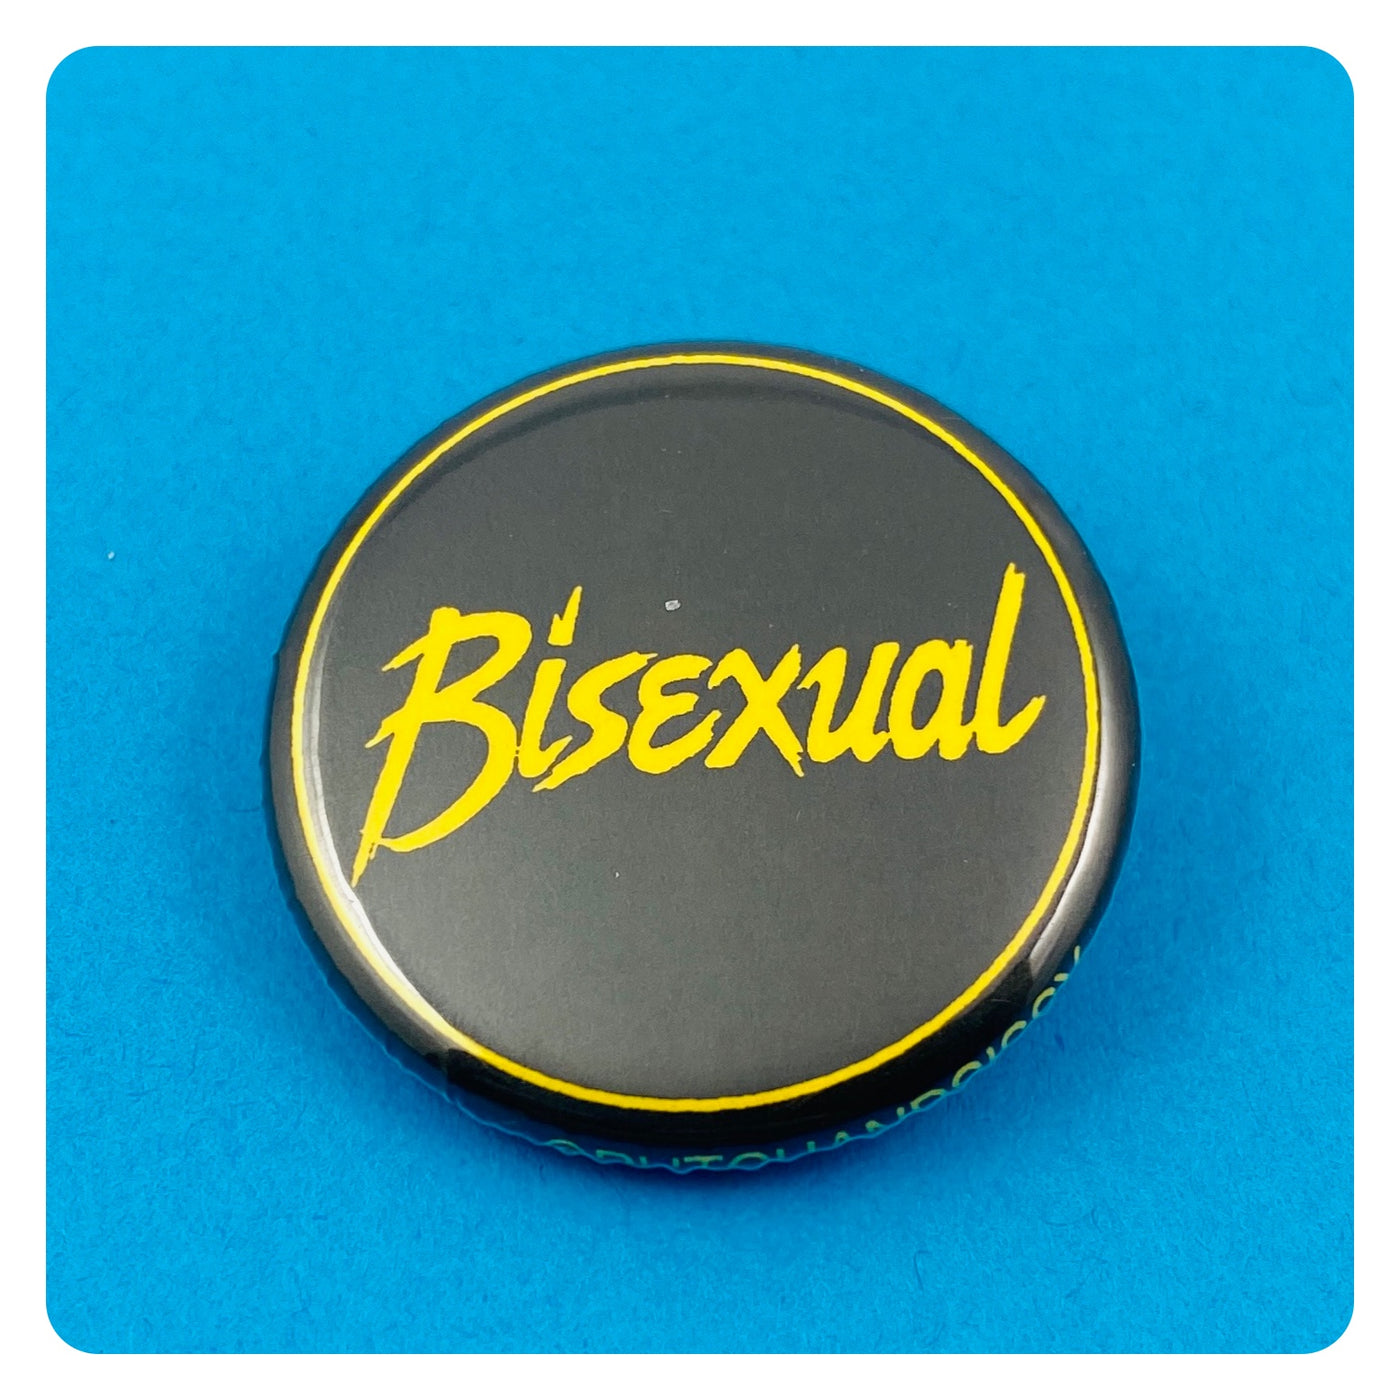 Bisexual Button